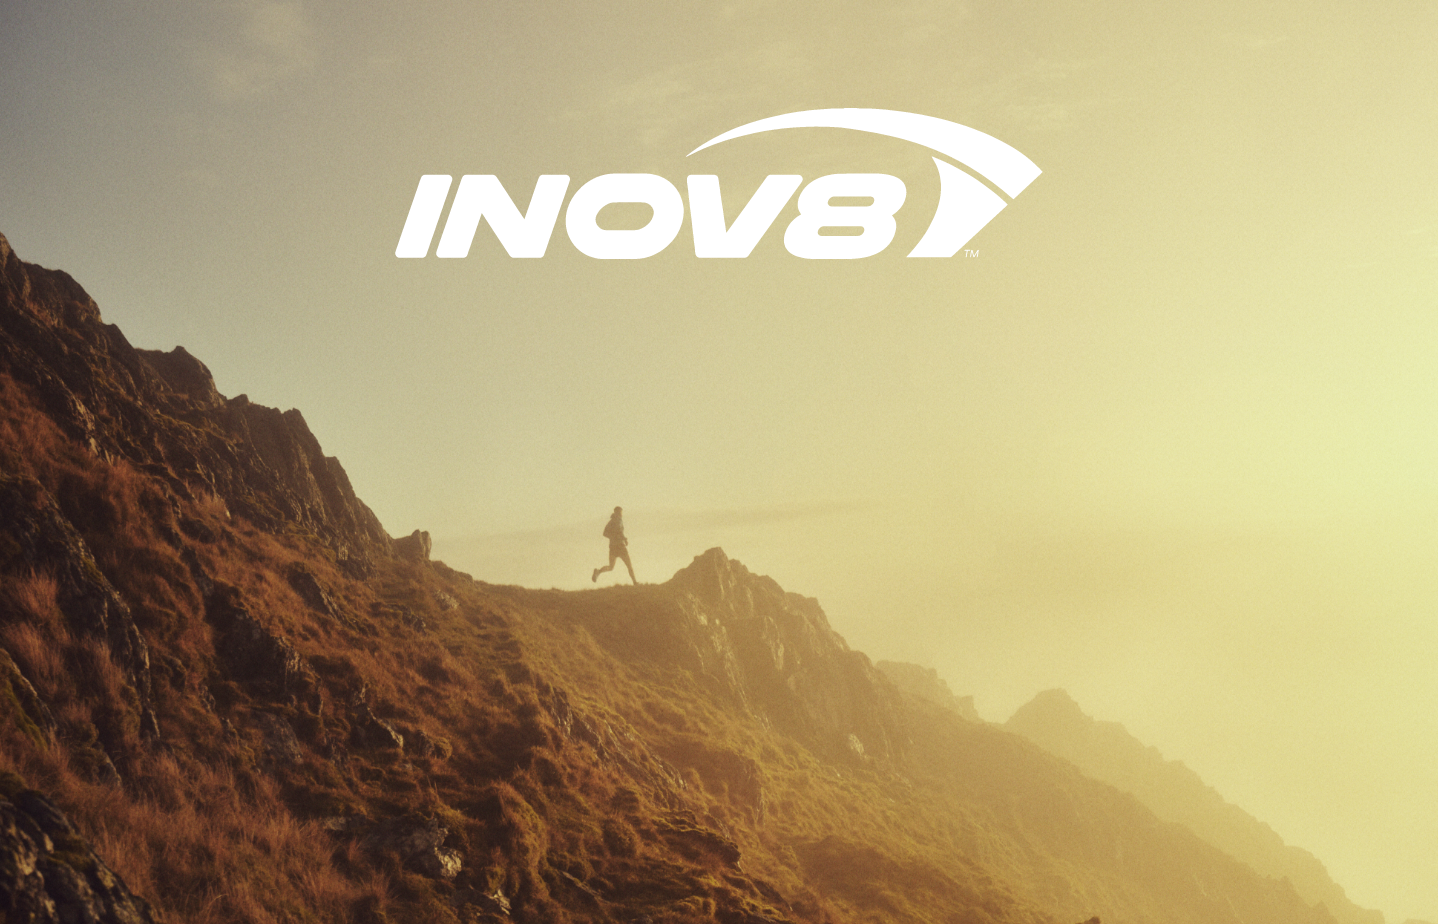 INOV8 - AMBITION IN MOTION